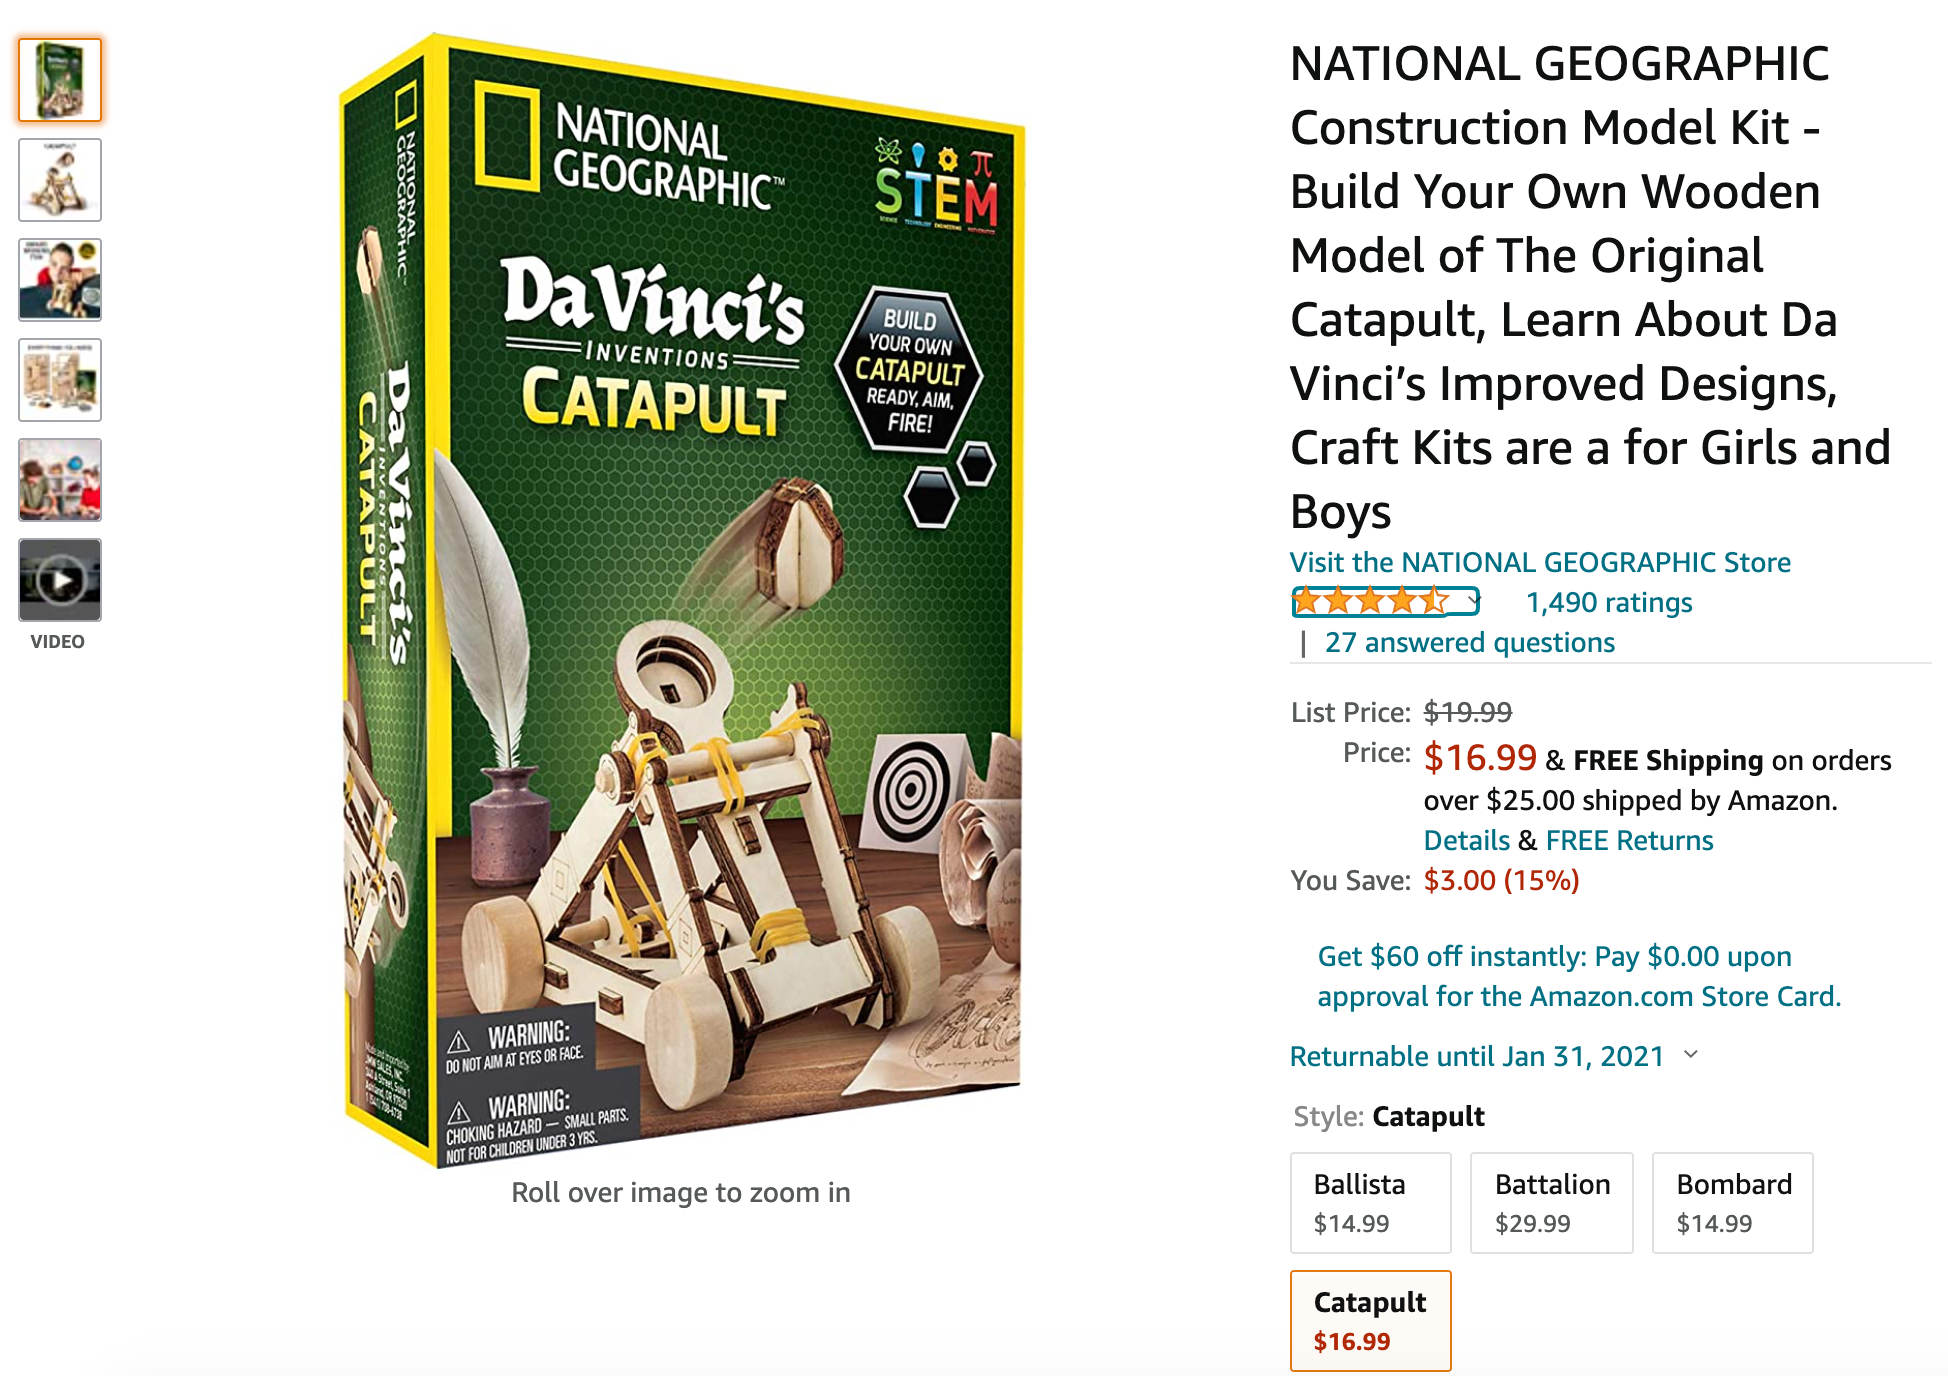 NATIONAL GEOGRAPHIC Construction Model Kit - Build Your Own Wooden Model of The Original Catapult, Learn About Da Vinci’s Improved Designs.jpg